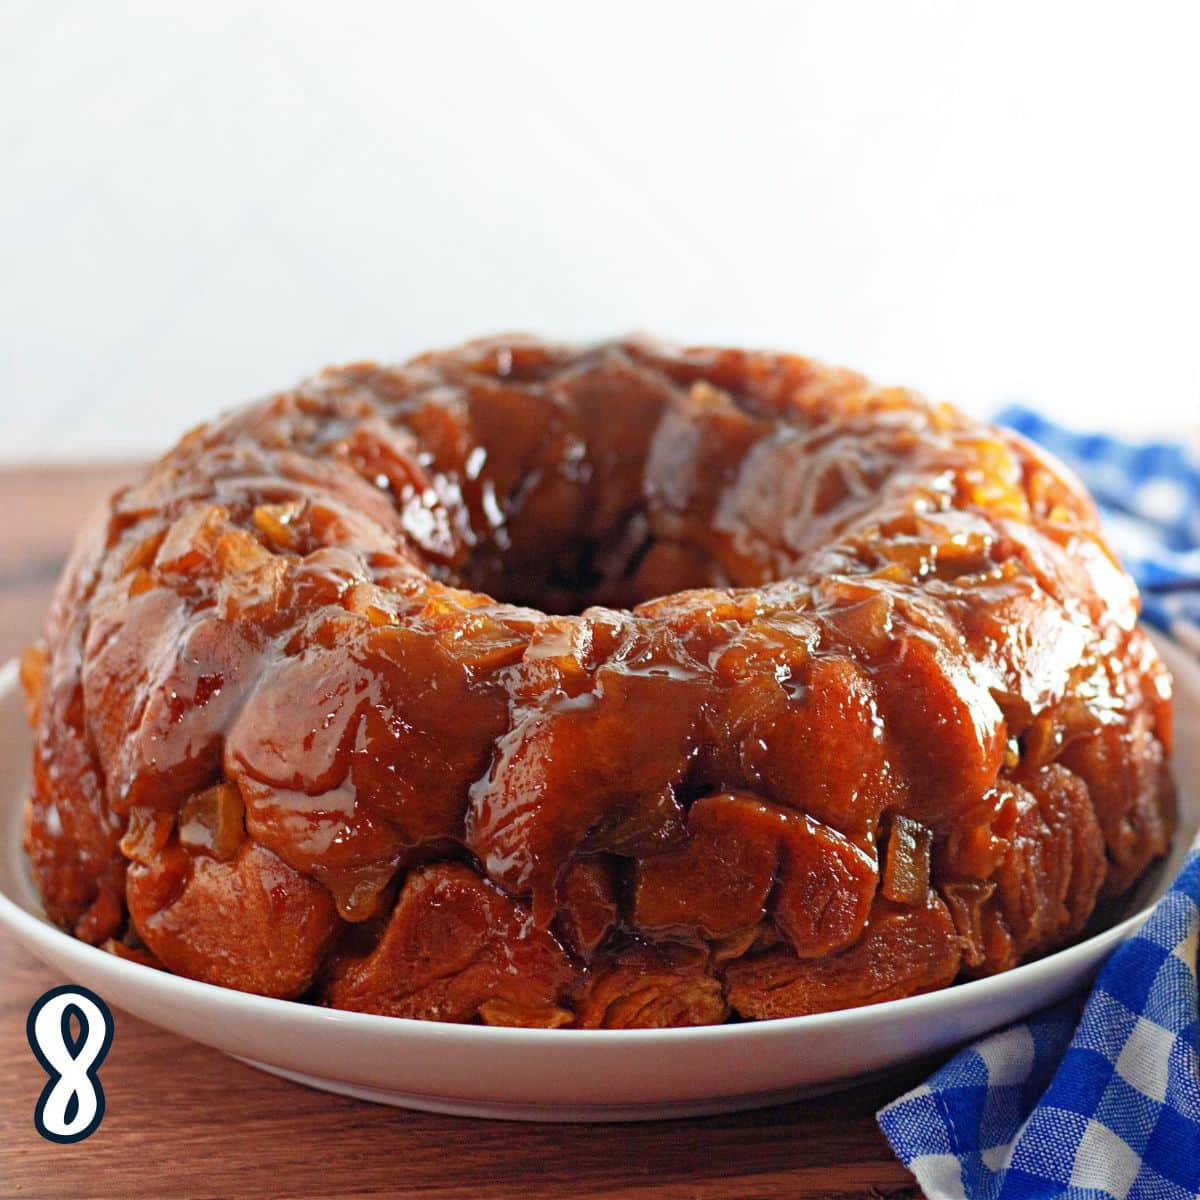 Glazed monkey bread on a white plate with a blue and white checkered napkin in the background.